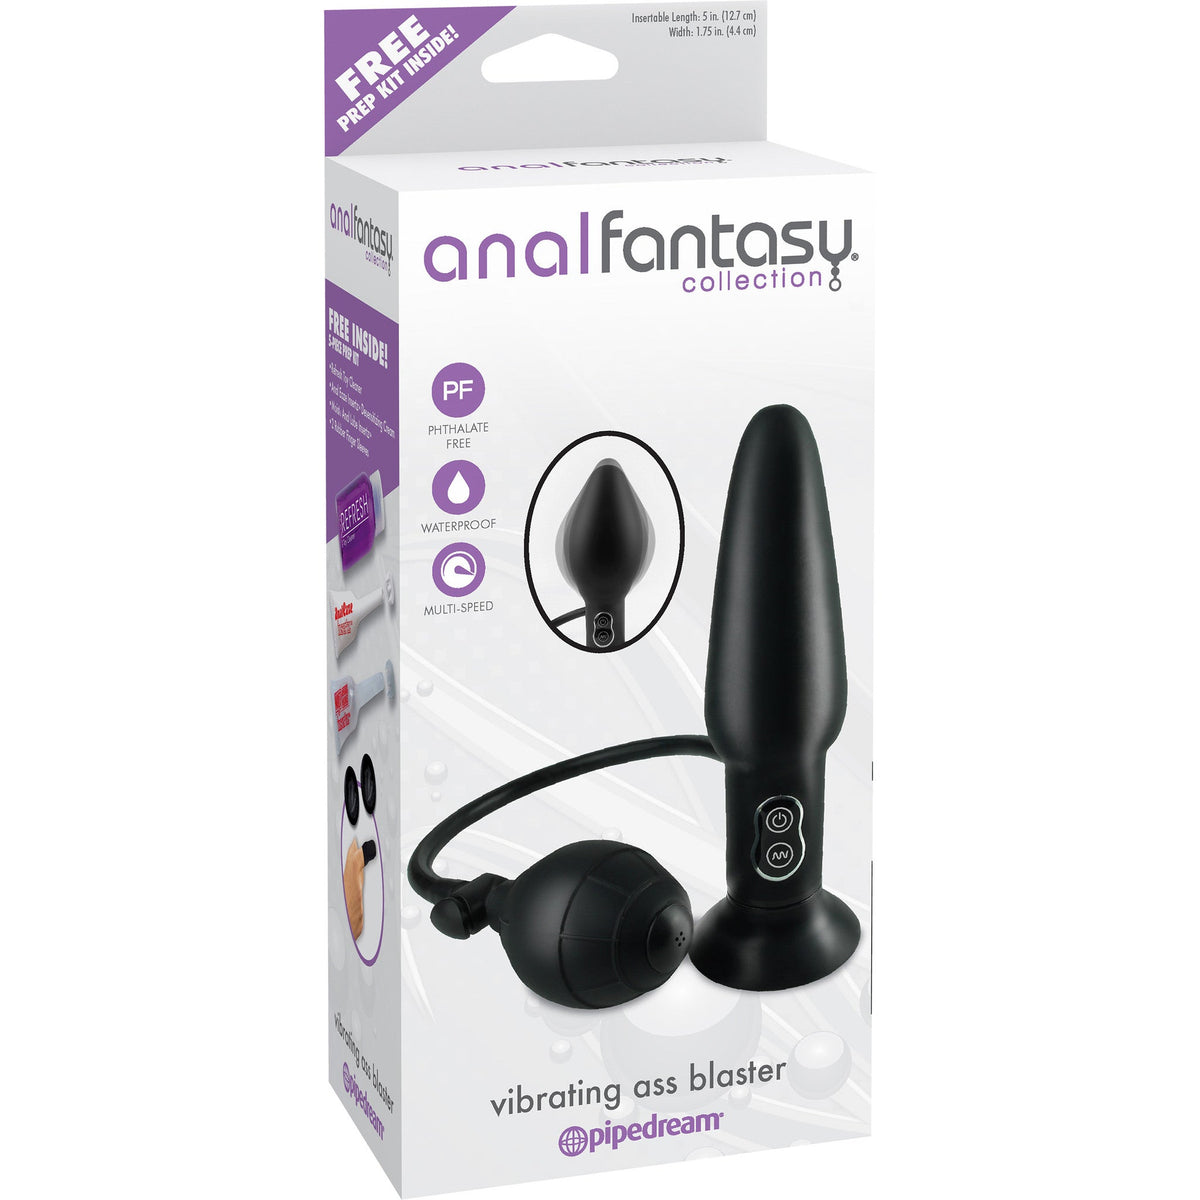 Pipedream - Anal Fantasy Collection Vibrating Ass Blaster -  Expandable Anal Plug (Vibration) Non Rechargeable  Durio.sg